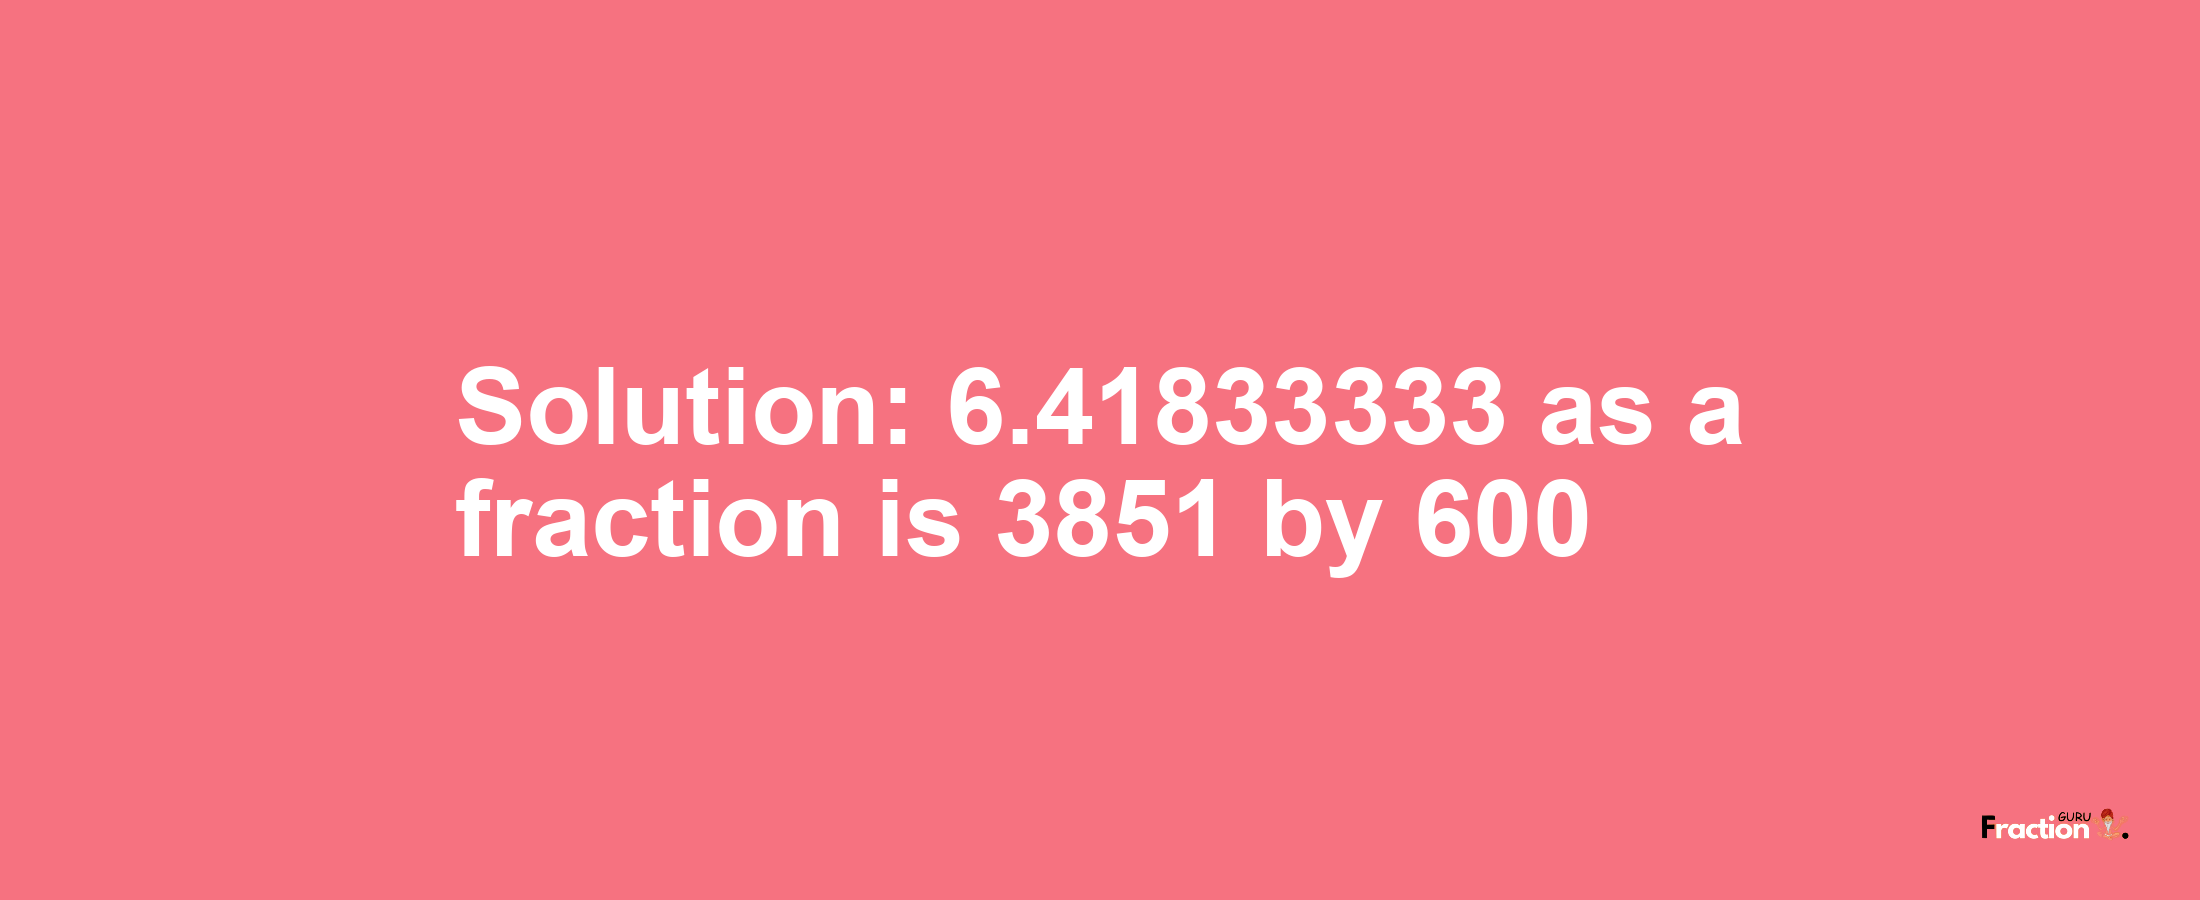 Solution:6.41833333 as a fraction is 3851/600